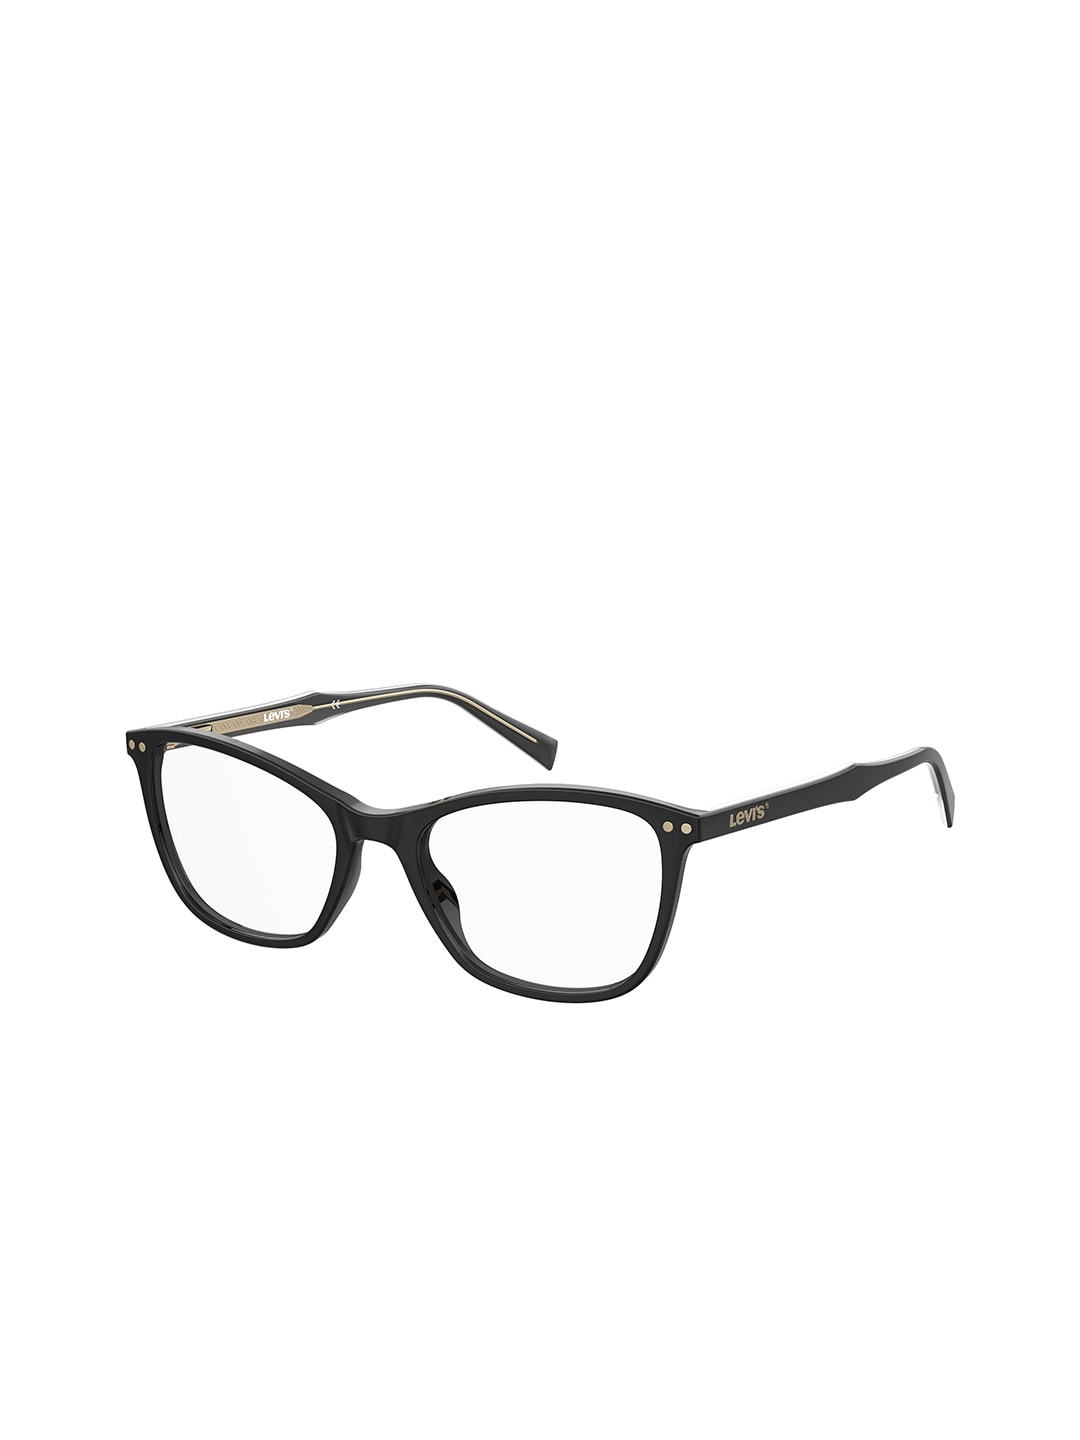 Levis Women Clear Lens & Black Square Sunglasses with Polarised Lens Price in India